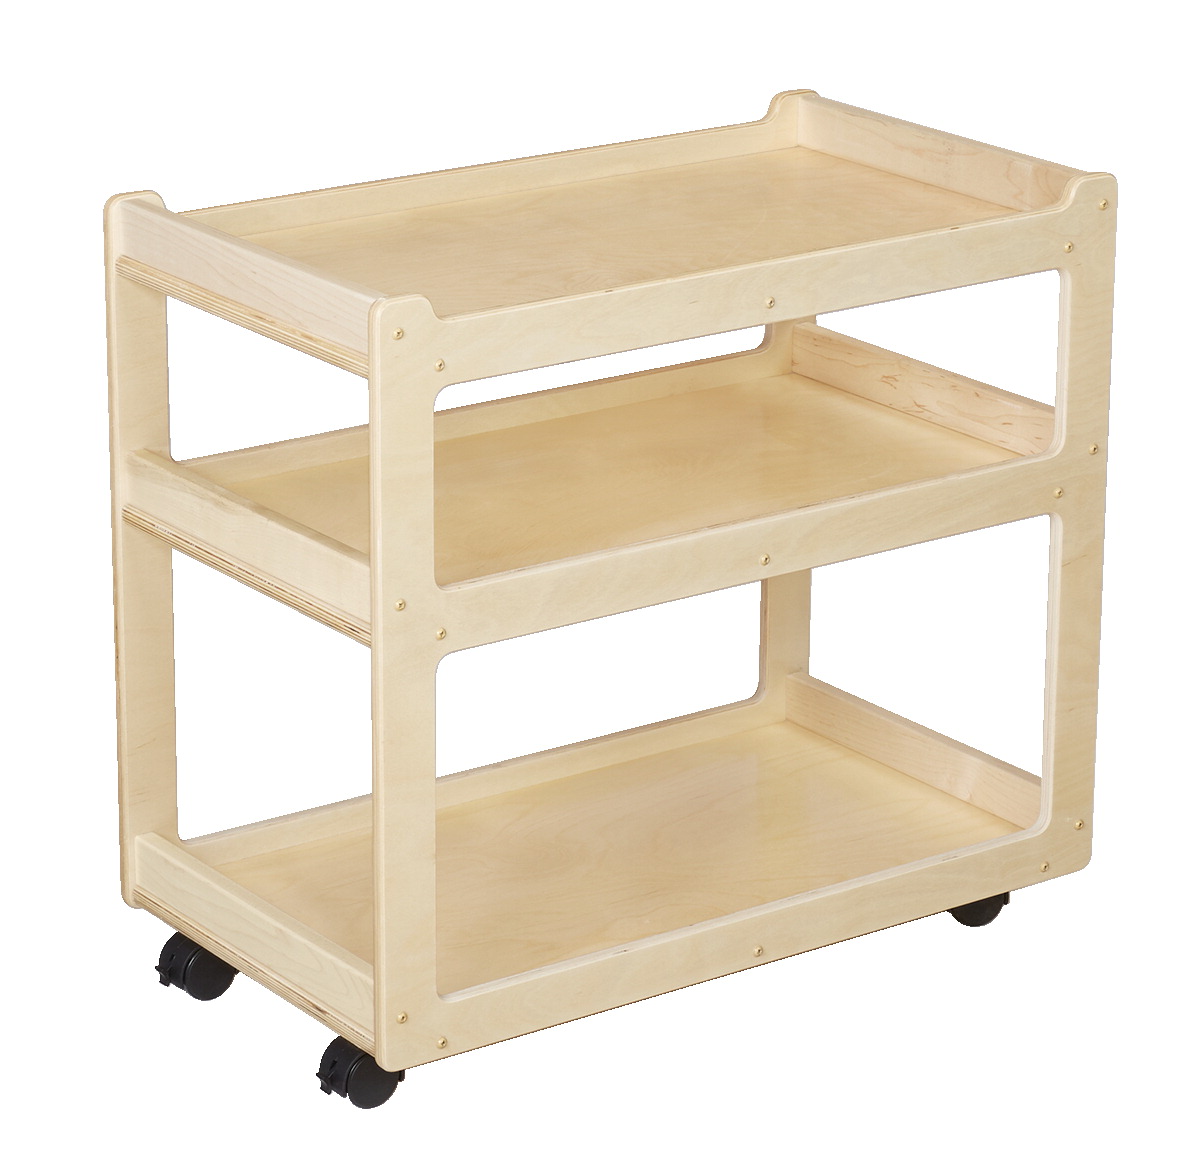 1588338 Childcraft 3-shelf Mobile Science Cart, 28 X 15.75 X 26.12 In.